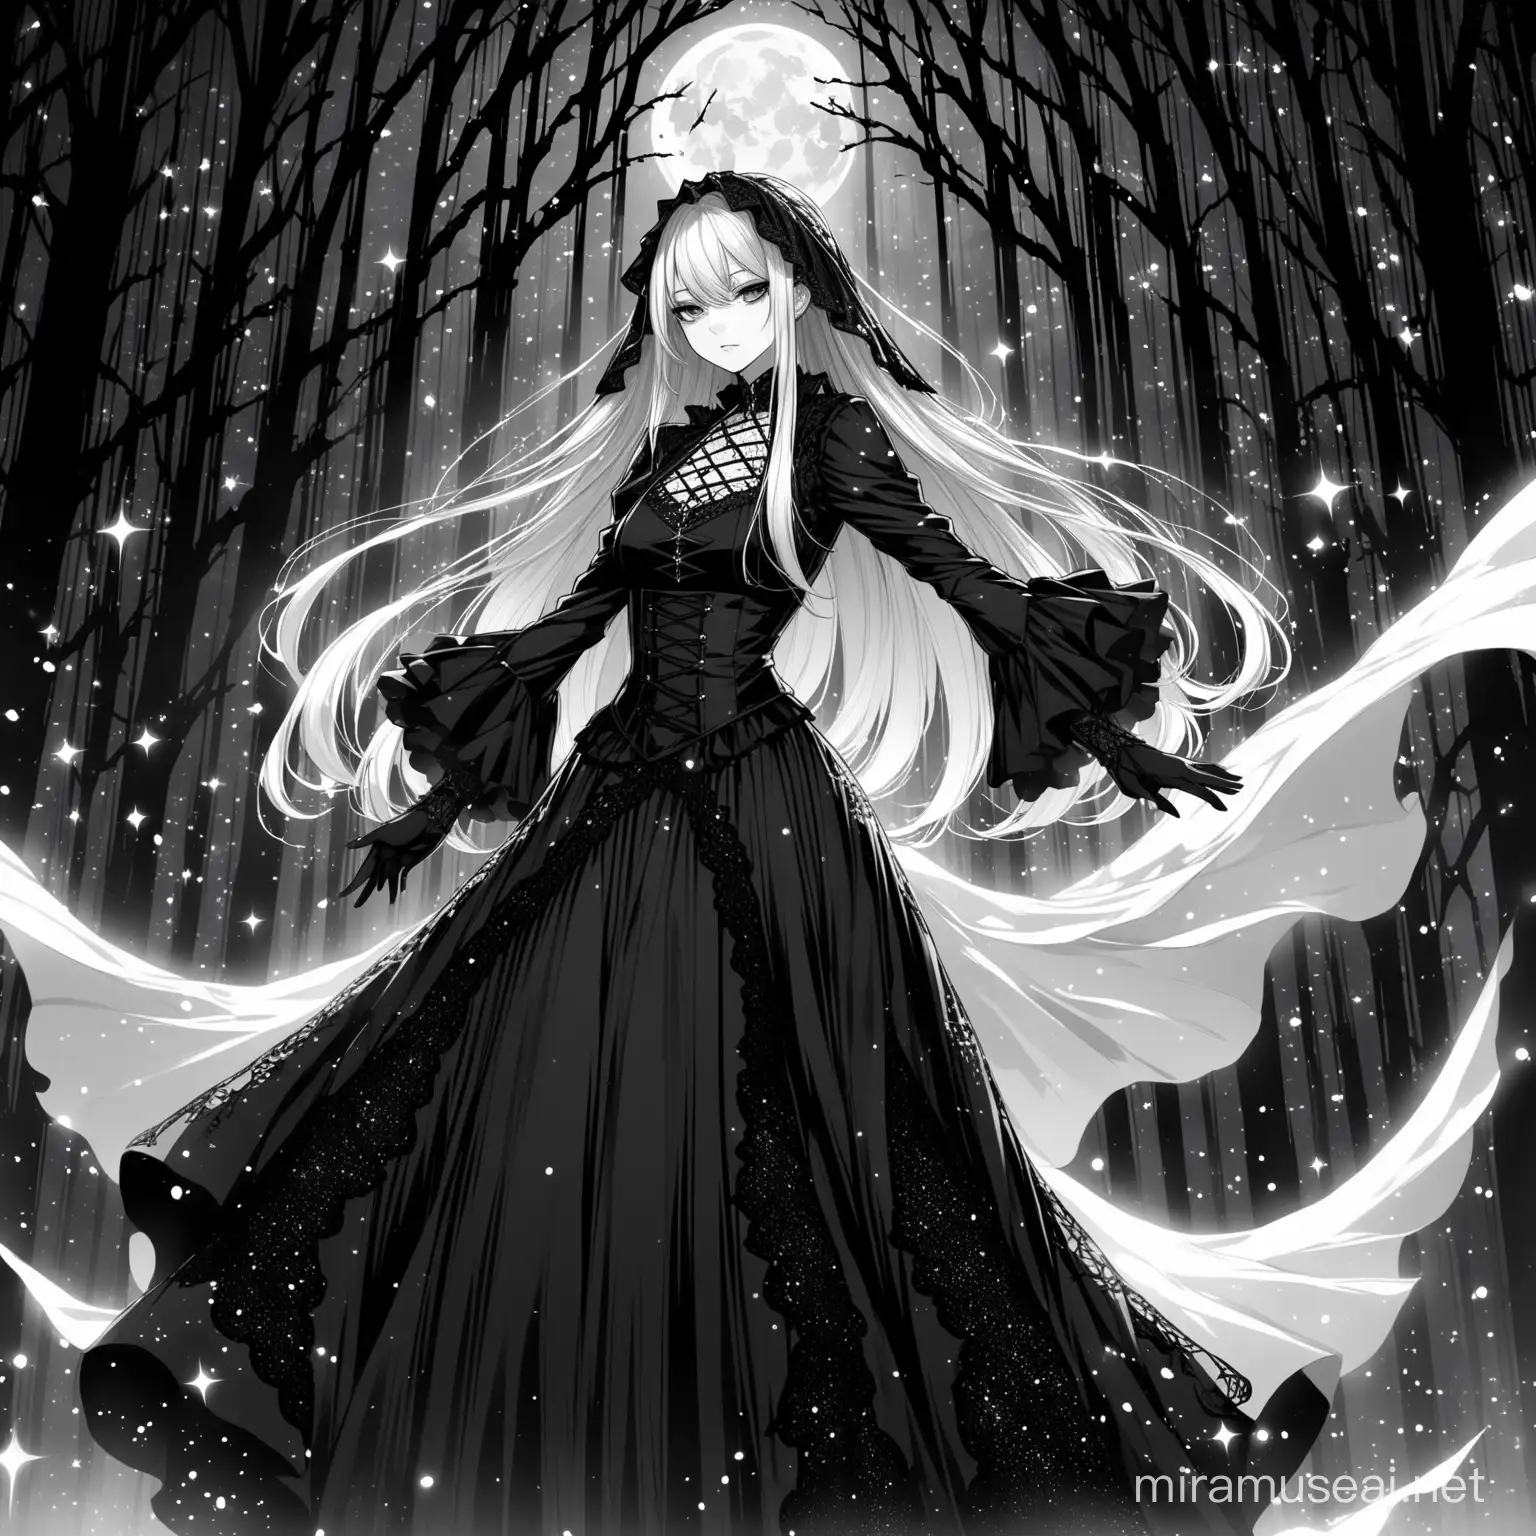 Subject: The main subject of the image is a gothic anime woman, exuding an air of mystery and allure. Her presence captivates attention and sets the tone for the overall atmosphere.
Setting: The background is adorned with black and white sparkles, creating a visually striking and ethereal environment. The contrast between the dark gothic elements and the shimmering sparkles adds depth and intrigue to the scene.
Style/Coloring: The image employs a black and white color palette, emphasizing the gothic theme. The stylistic choice enhances the dramatic and enigmatic qualities, contributing to the overall aesthetic appeal.
Action: The anime woman is depicted in a poised or dynamic pose, conveying a sense of strength, confidence, or perhaps a hint of vulnerability. Her actions add a layer of narrative to the visual storytelling.
Items: The presence of stickers in the background suggests a touch of personalization or symbolism. These stickers could be intricate symbols, further enriching the narrative or character backstory.
Costume/Appearance: The gothic anime woman's attire and appearance are likely characterized by dark, elegant clothing, and possibly unique accessories that contribute to her mysterious allure.
Accessories: Consider incorporating accessories like intricate jewelry, perhaps featuring symbolic elements, adding depth to the character and complementing the gothic theme.
